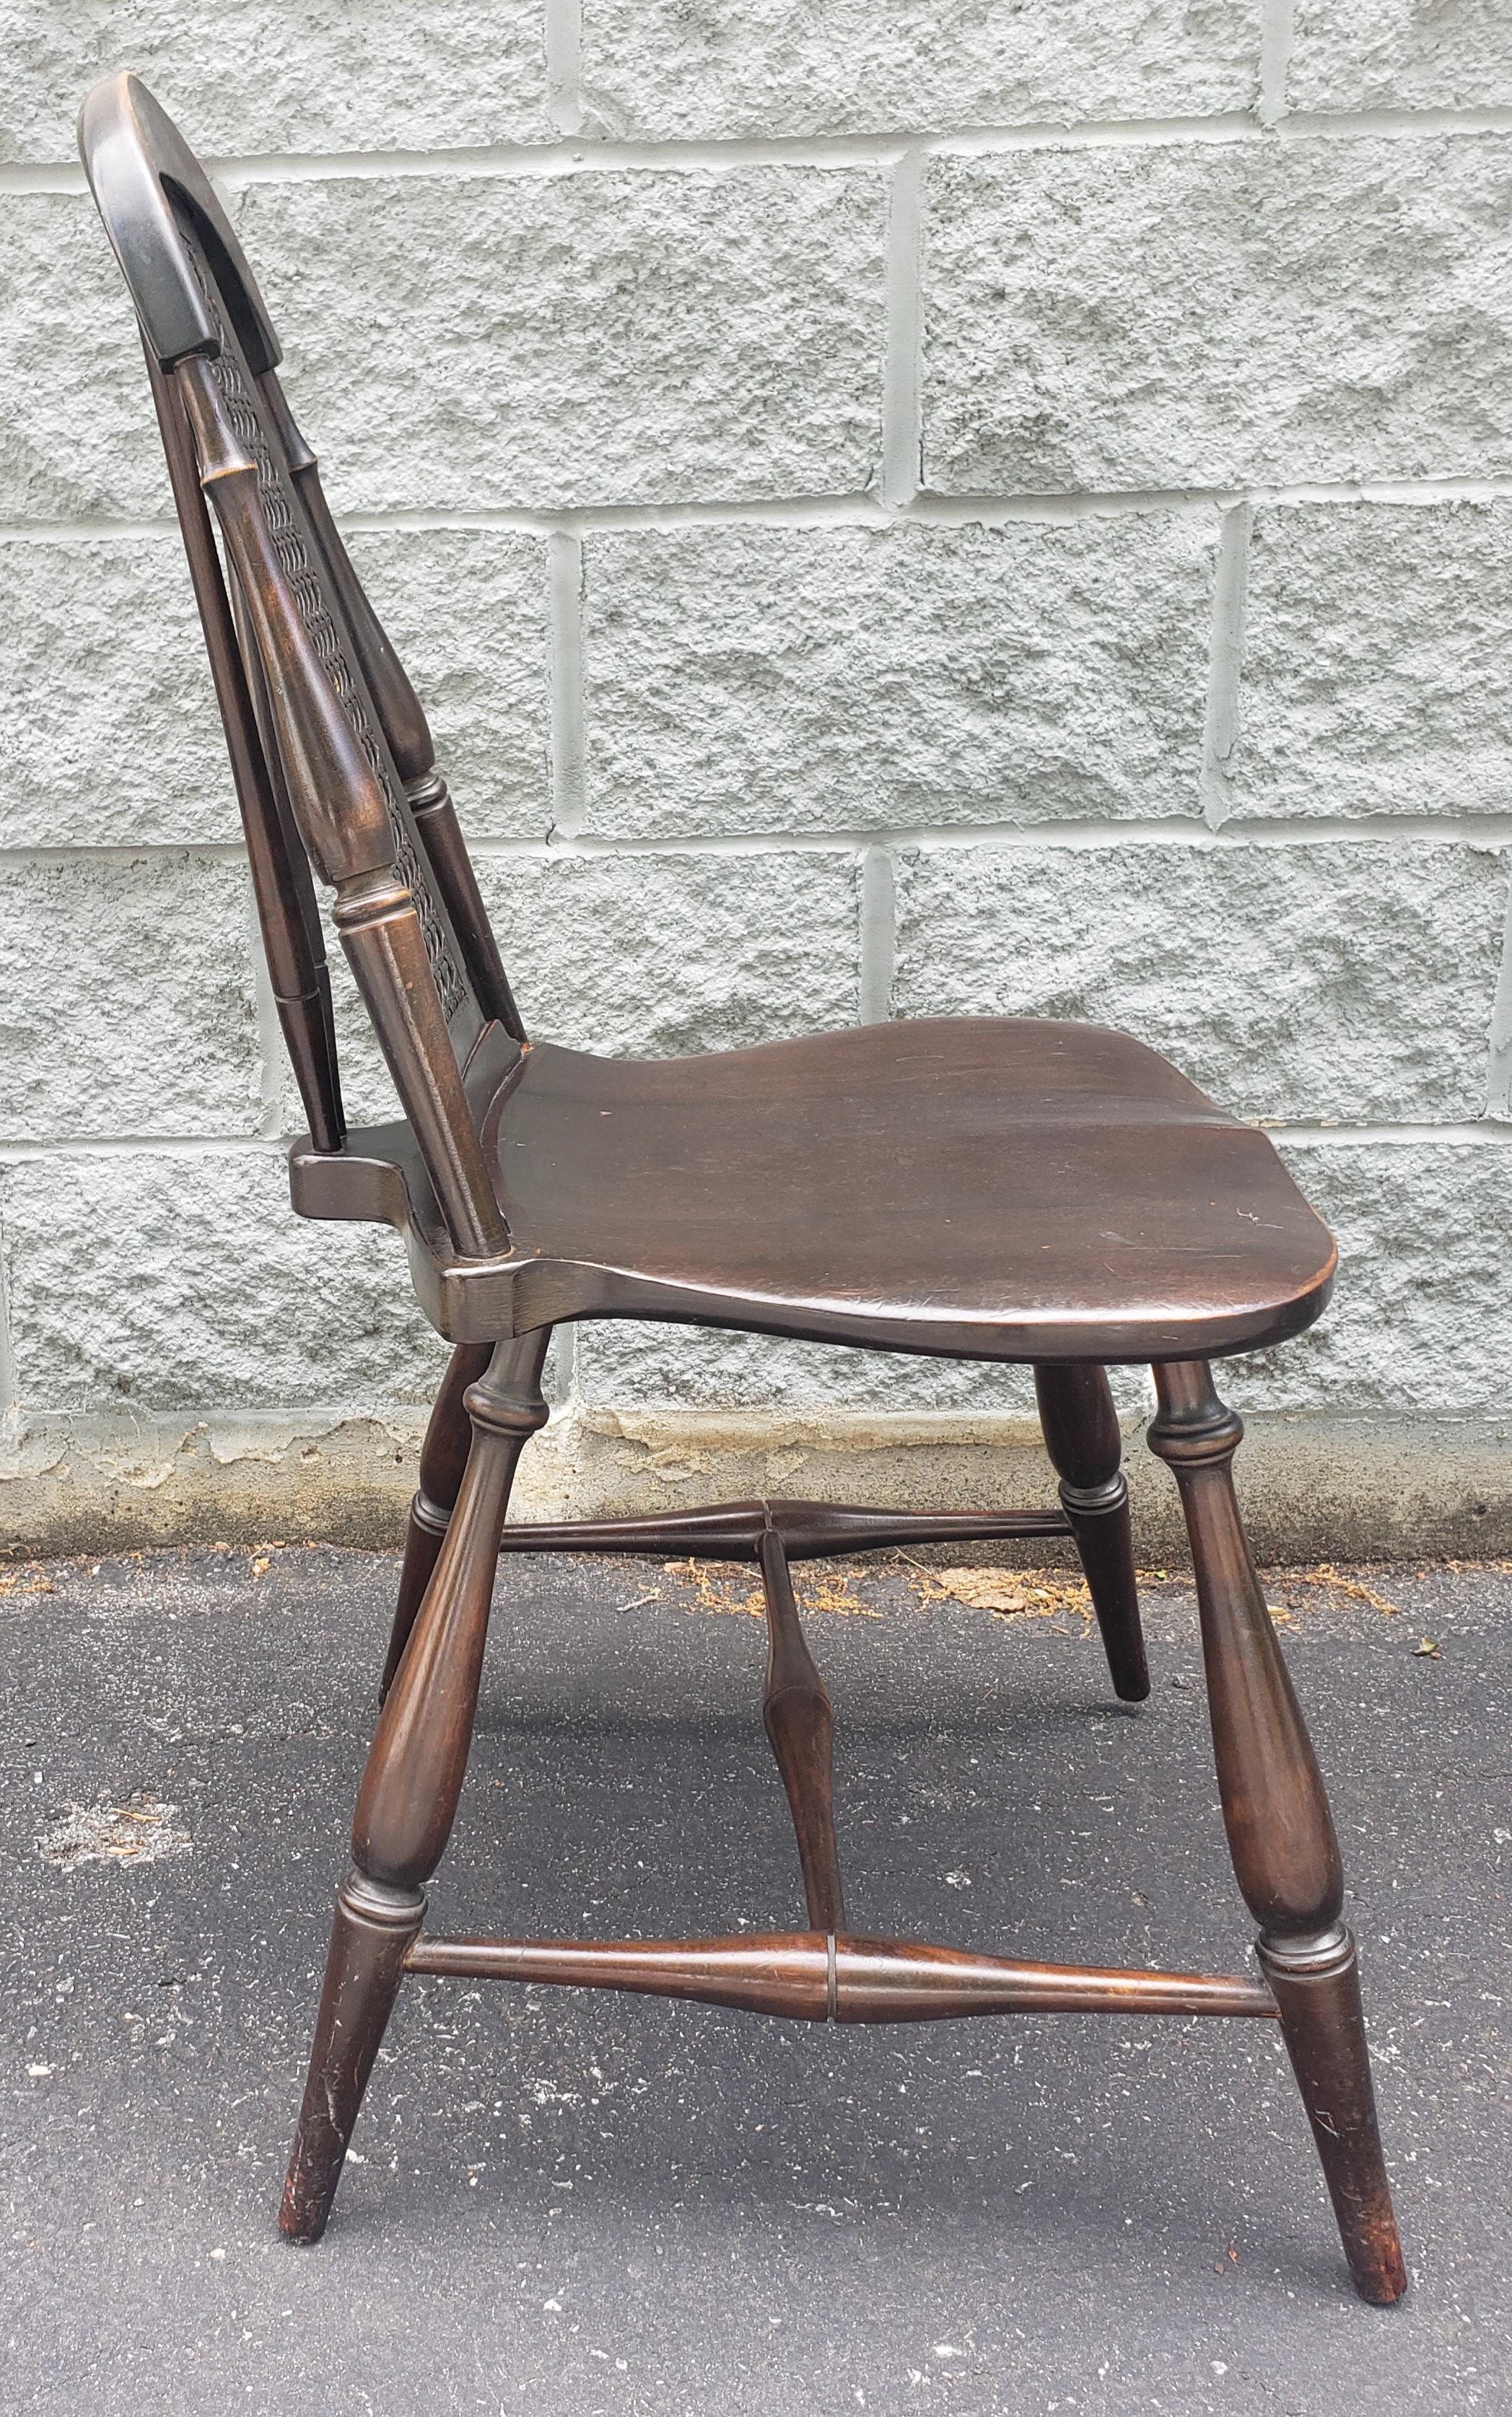 American Rare 1940s Walnut and Cane Brace Back Windsor Chair For Sale